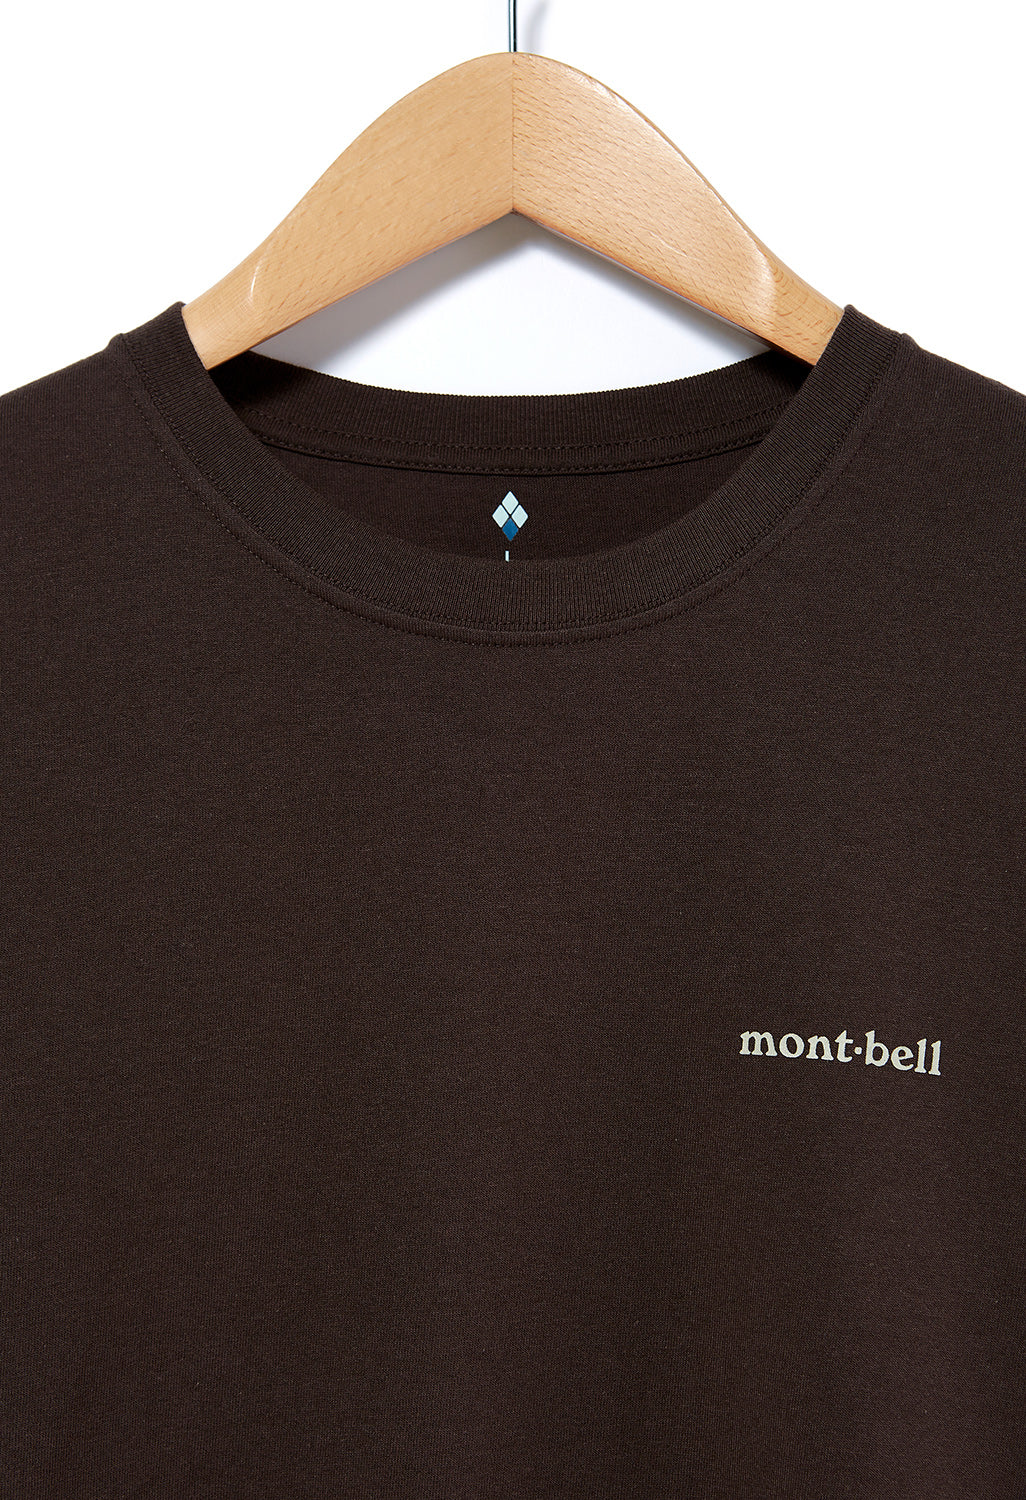 Montbell Men's Pear Skin Cotton Long Sleeve T-Shirt - Chocolate